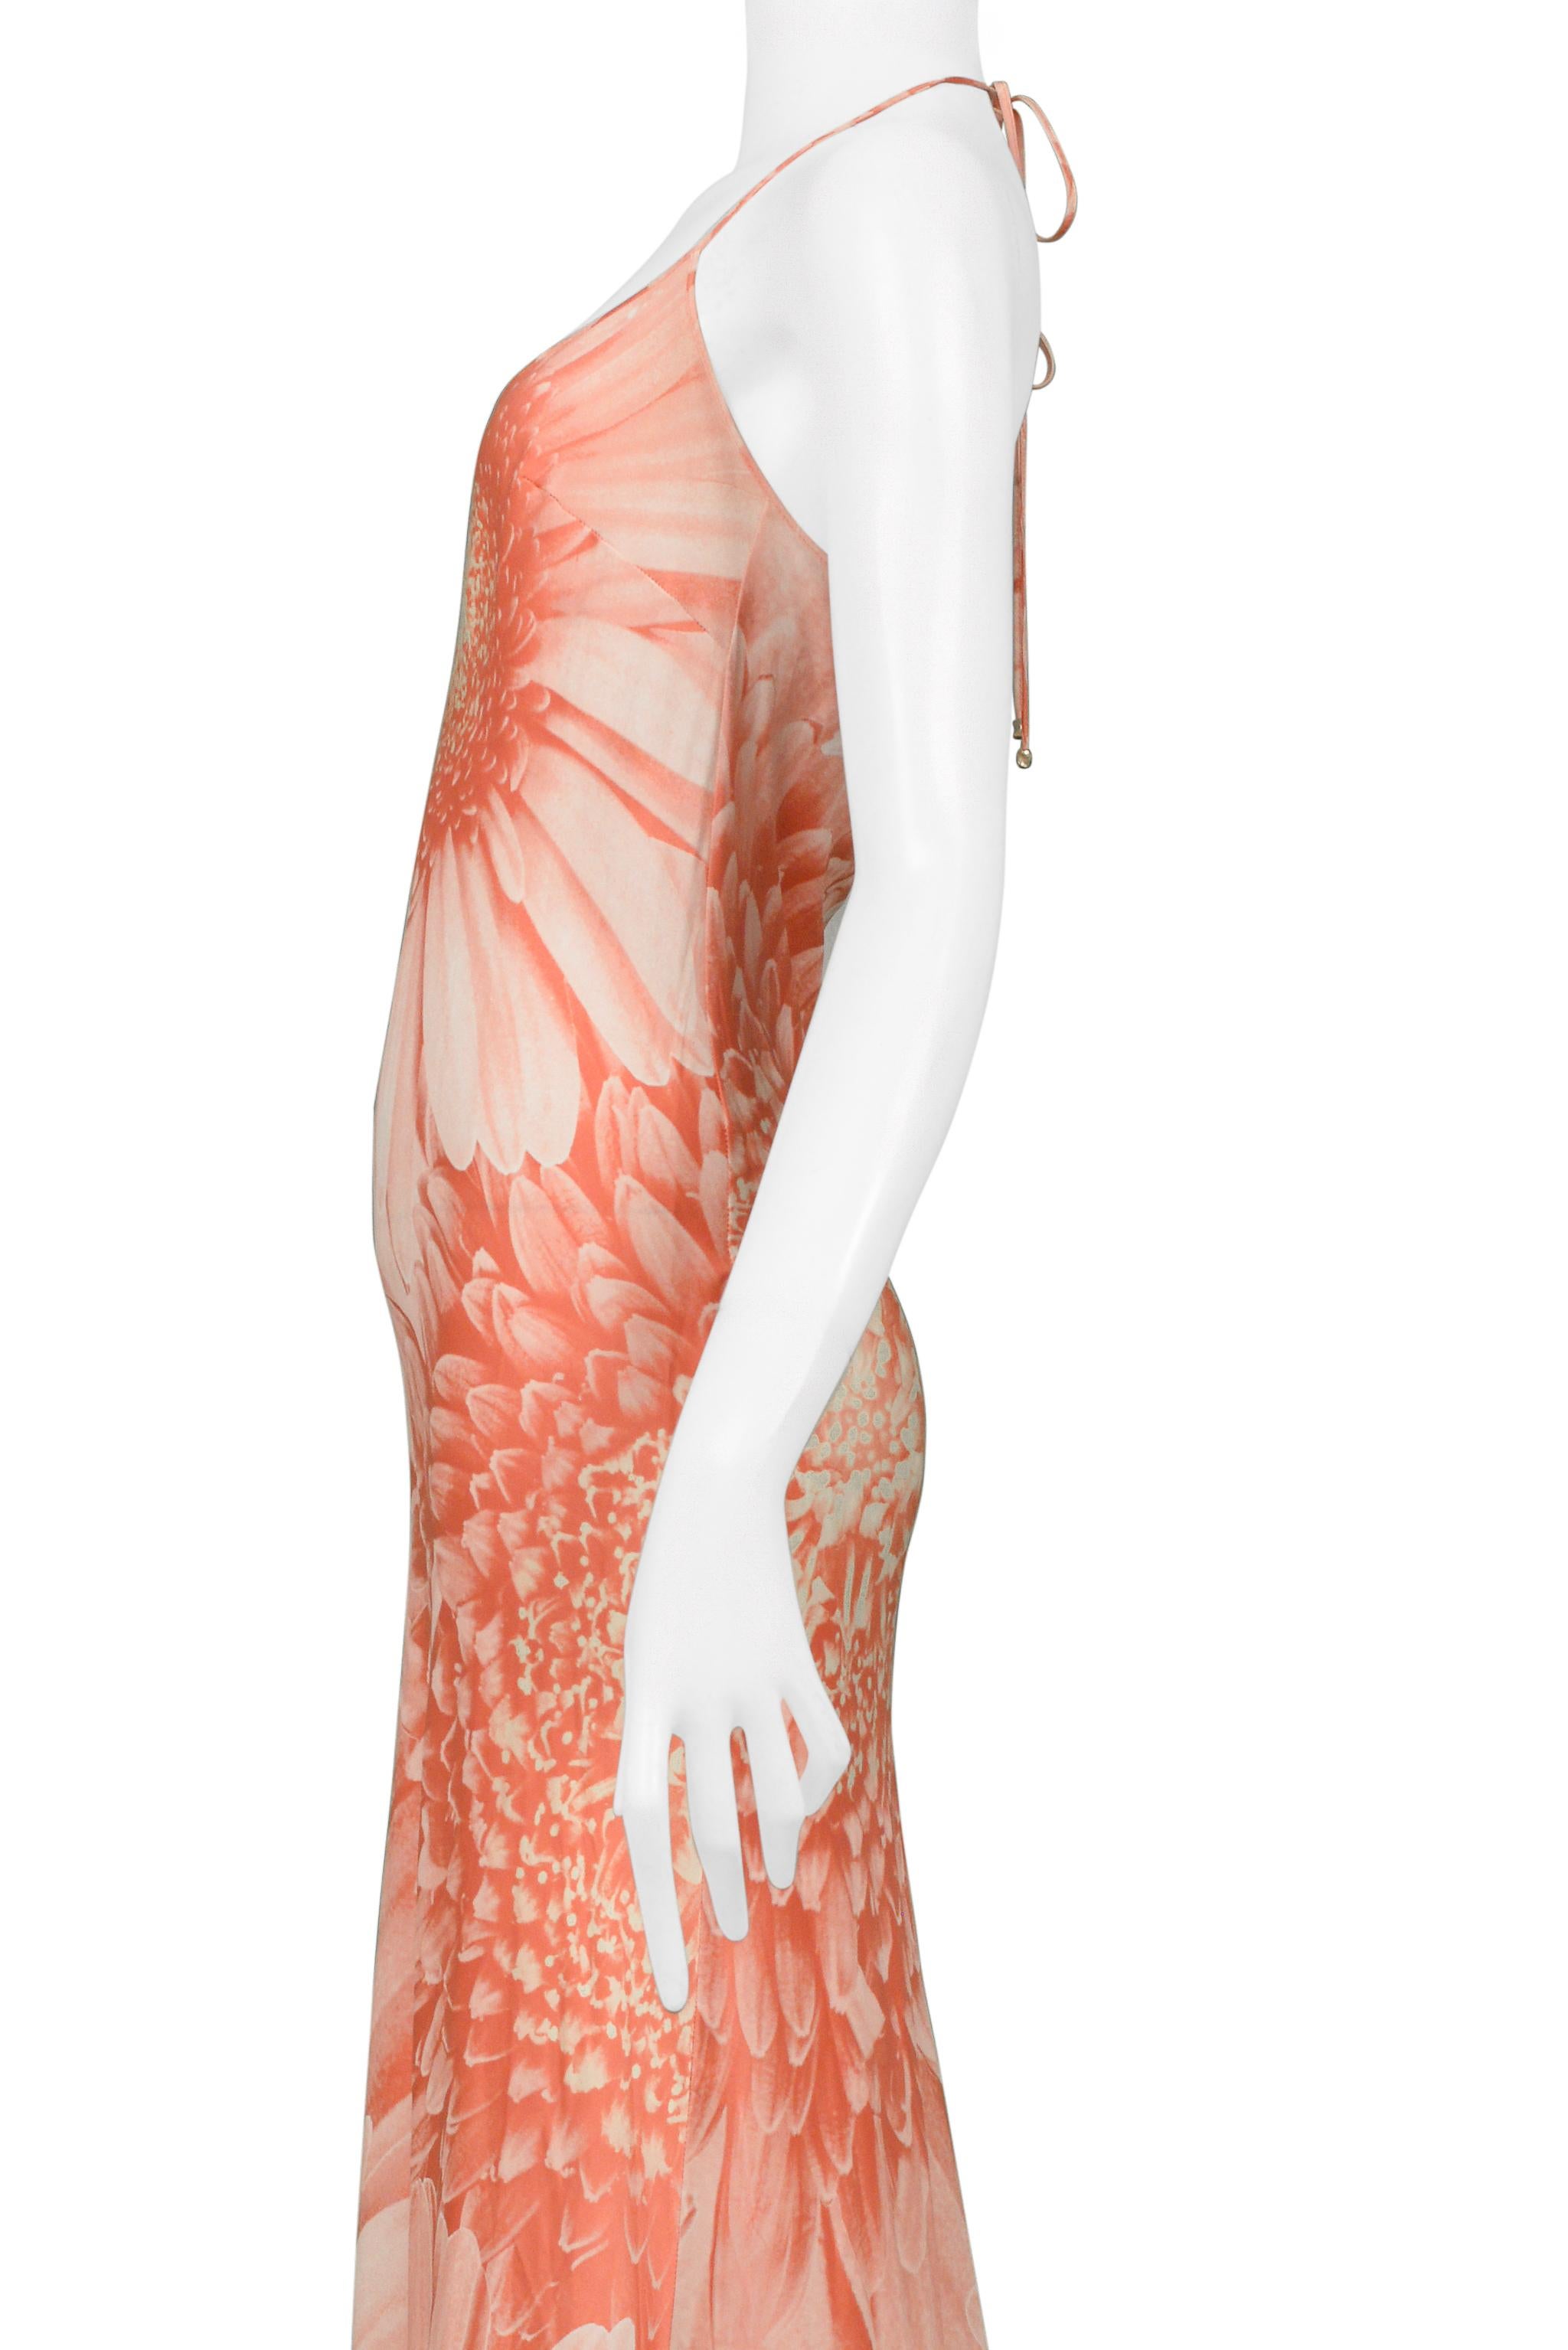 Roberto Cavalli Pink Daisy Maxi Slip Dress In Excellent Condition For Sale In Los Angeles, CA